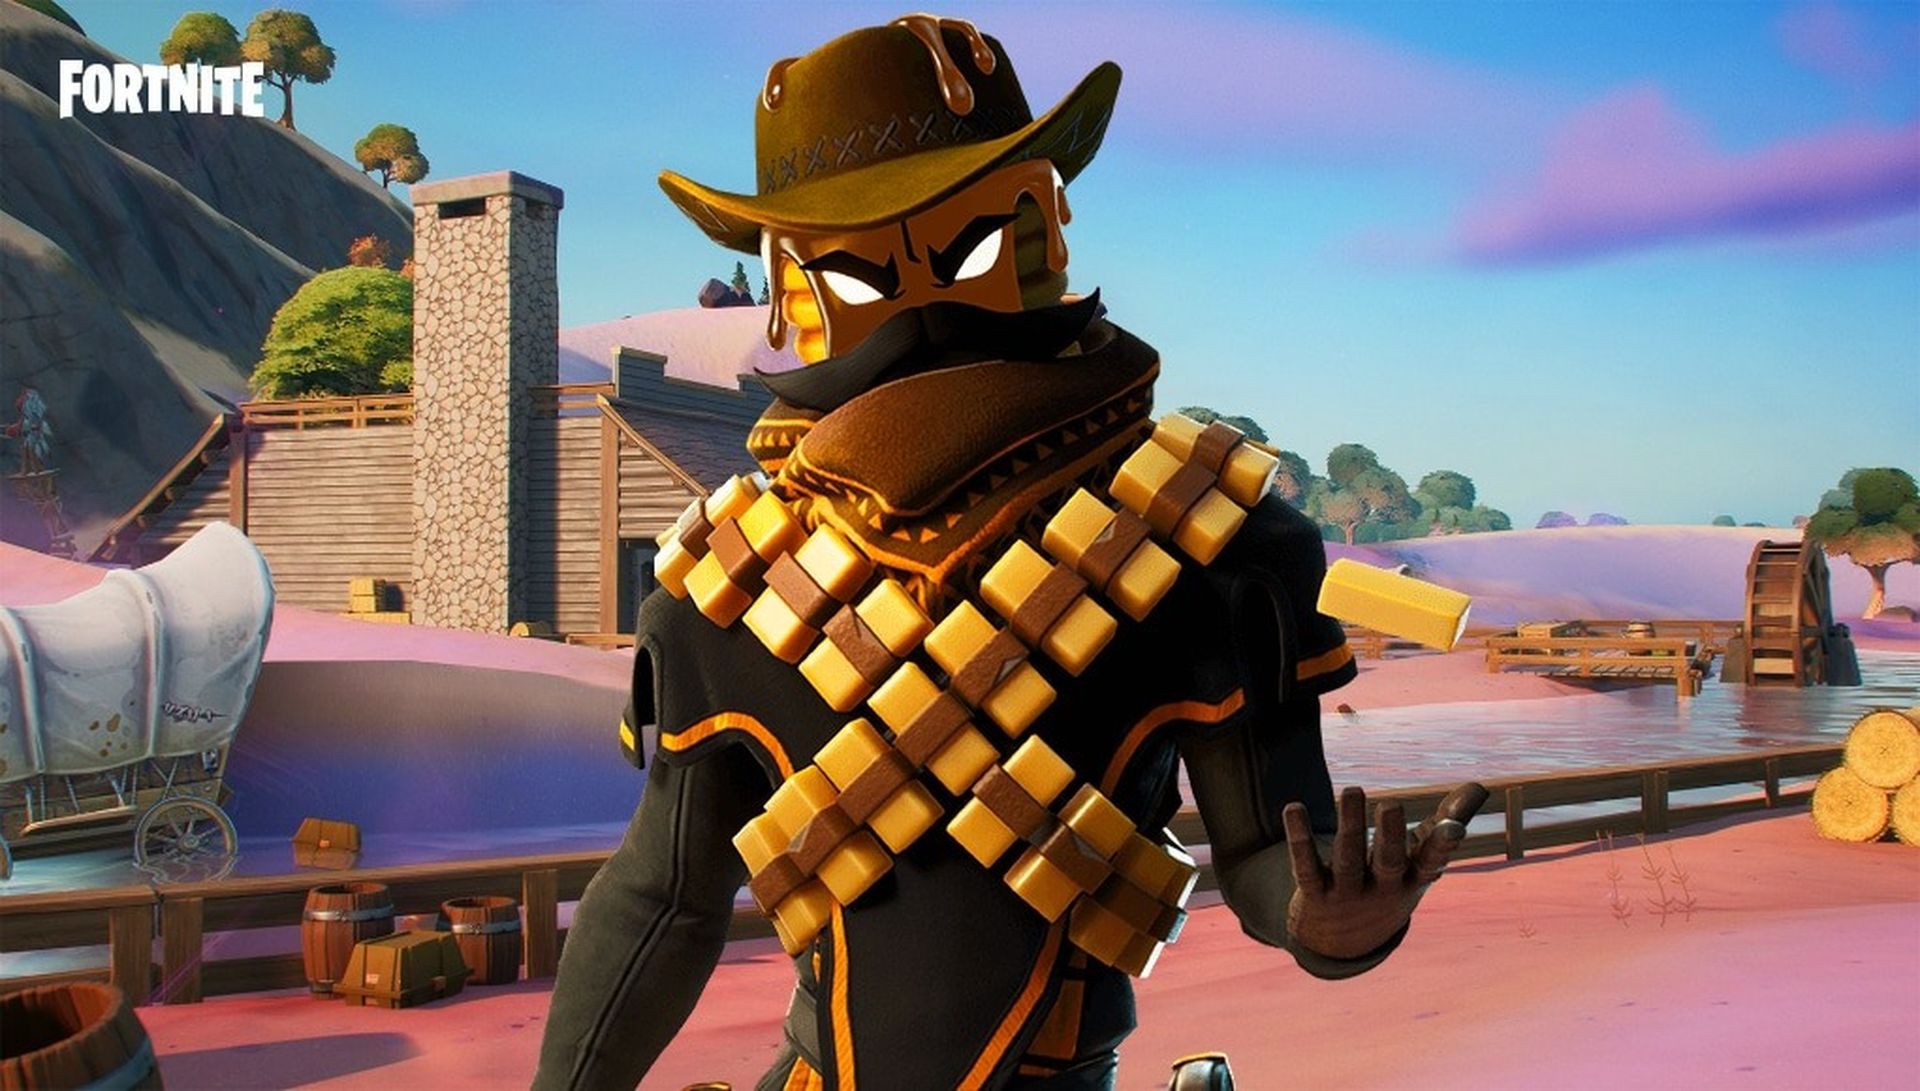 We are witnessing a new Fortnite x Fall Guys collaboration, in this guide we are going to show you how get Major Mancake skin in Fortnite. Not only that, Fortnite Crown Clash challenge rewards are also really worth to take a look at.